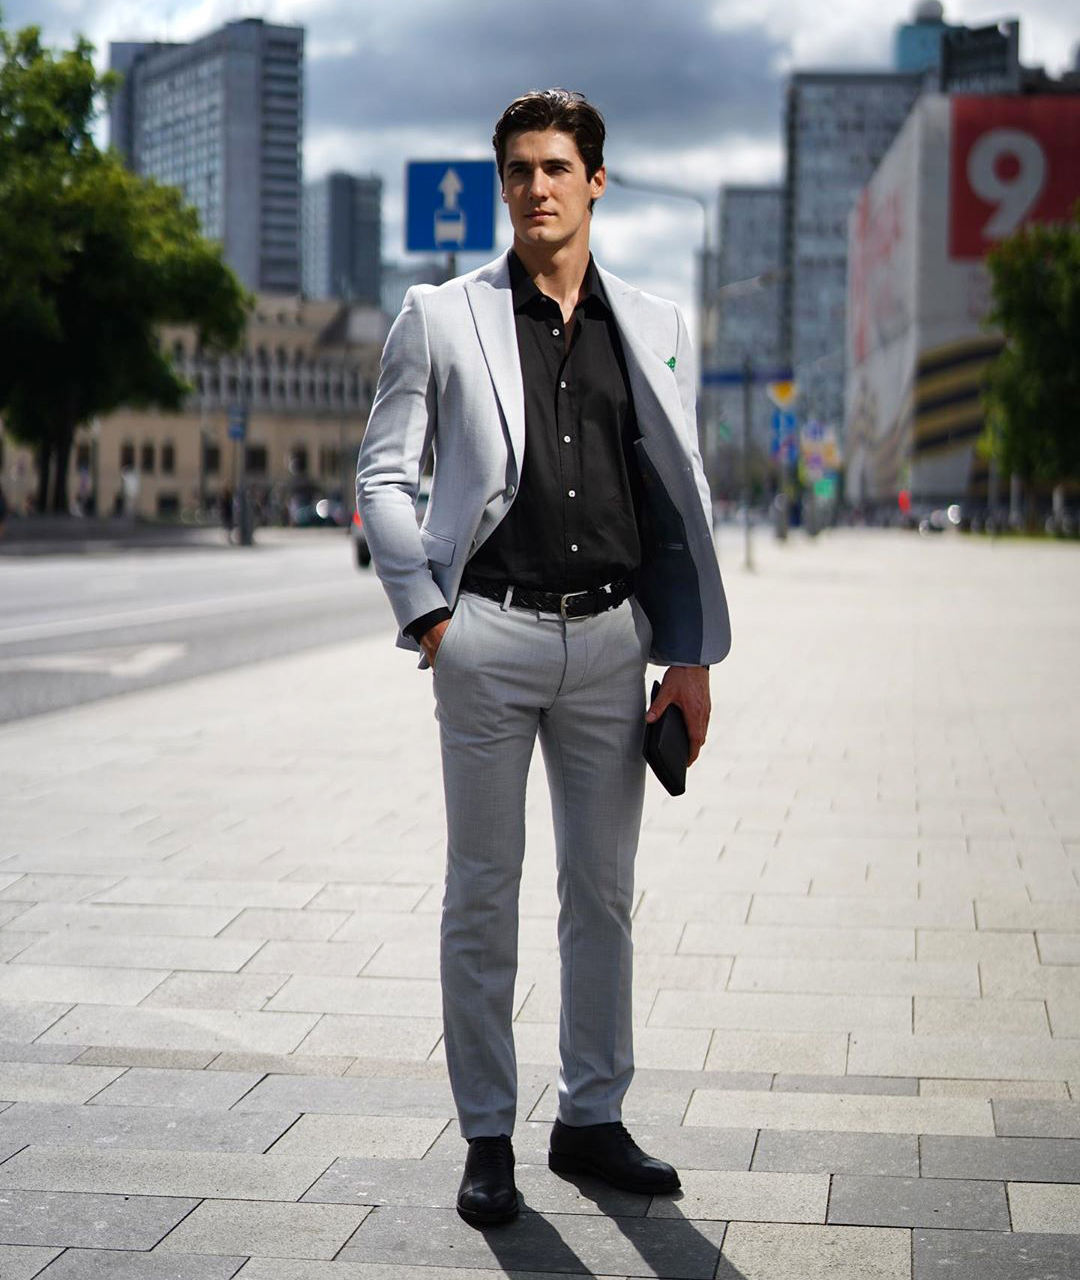 Light Grey Suit And Black Dress Shirt With Black Oxford Shoes 